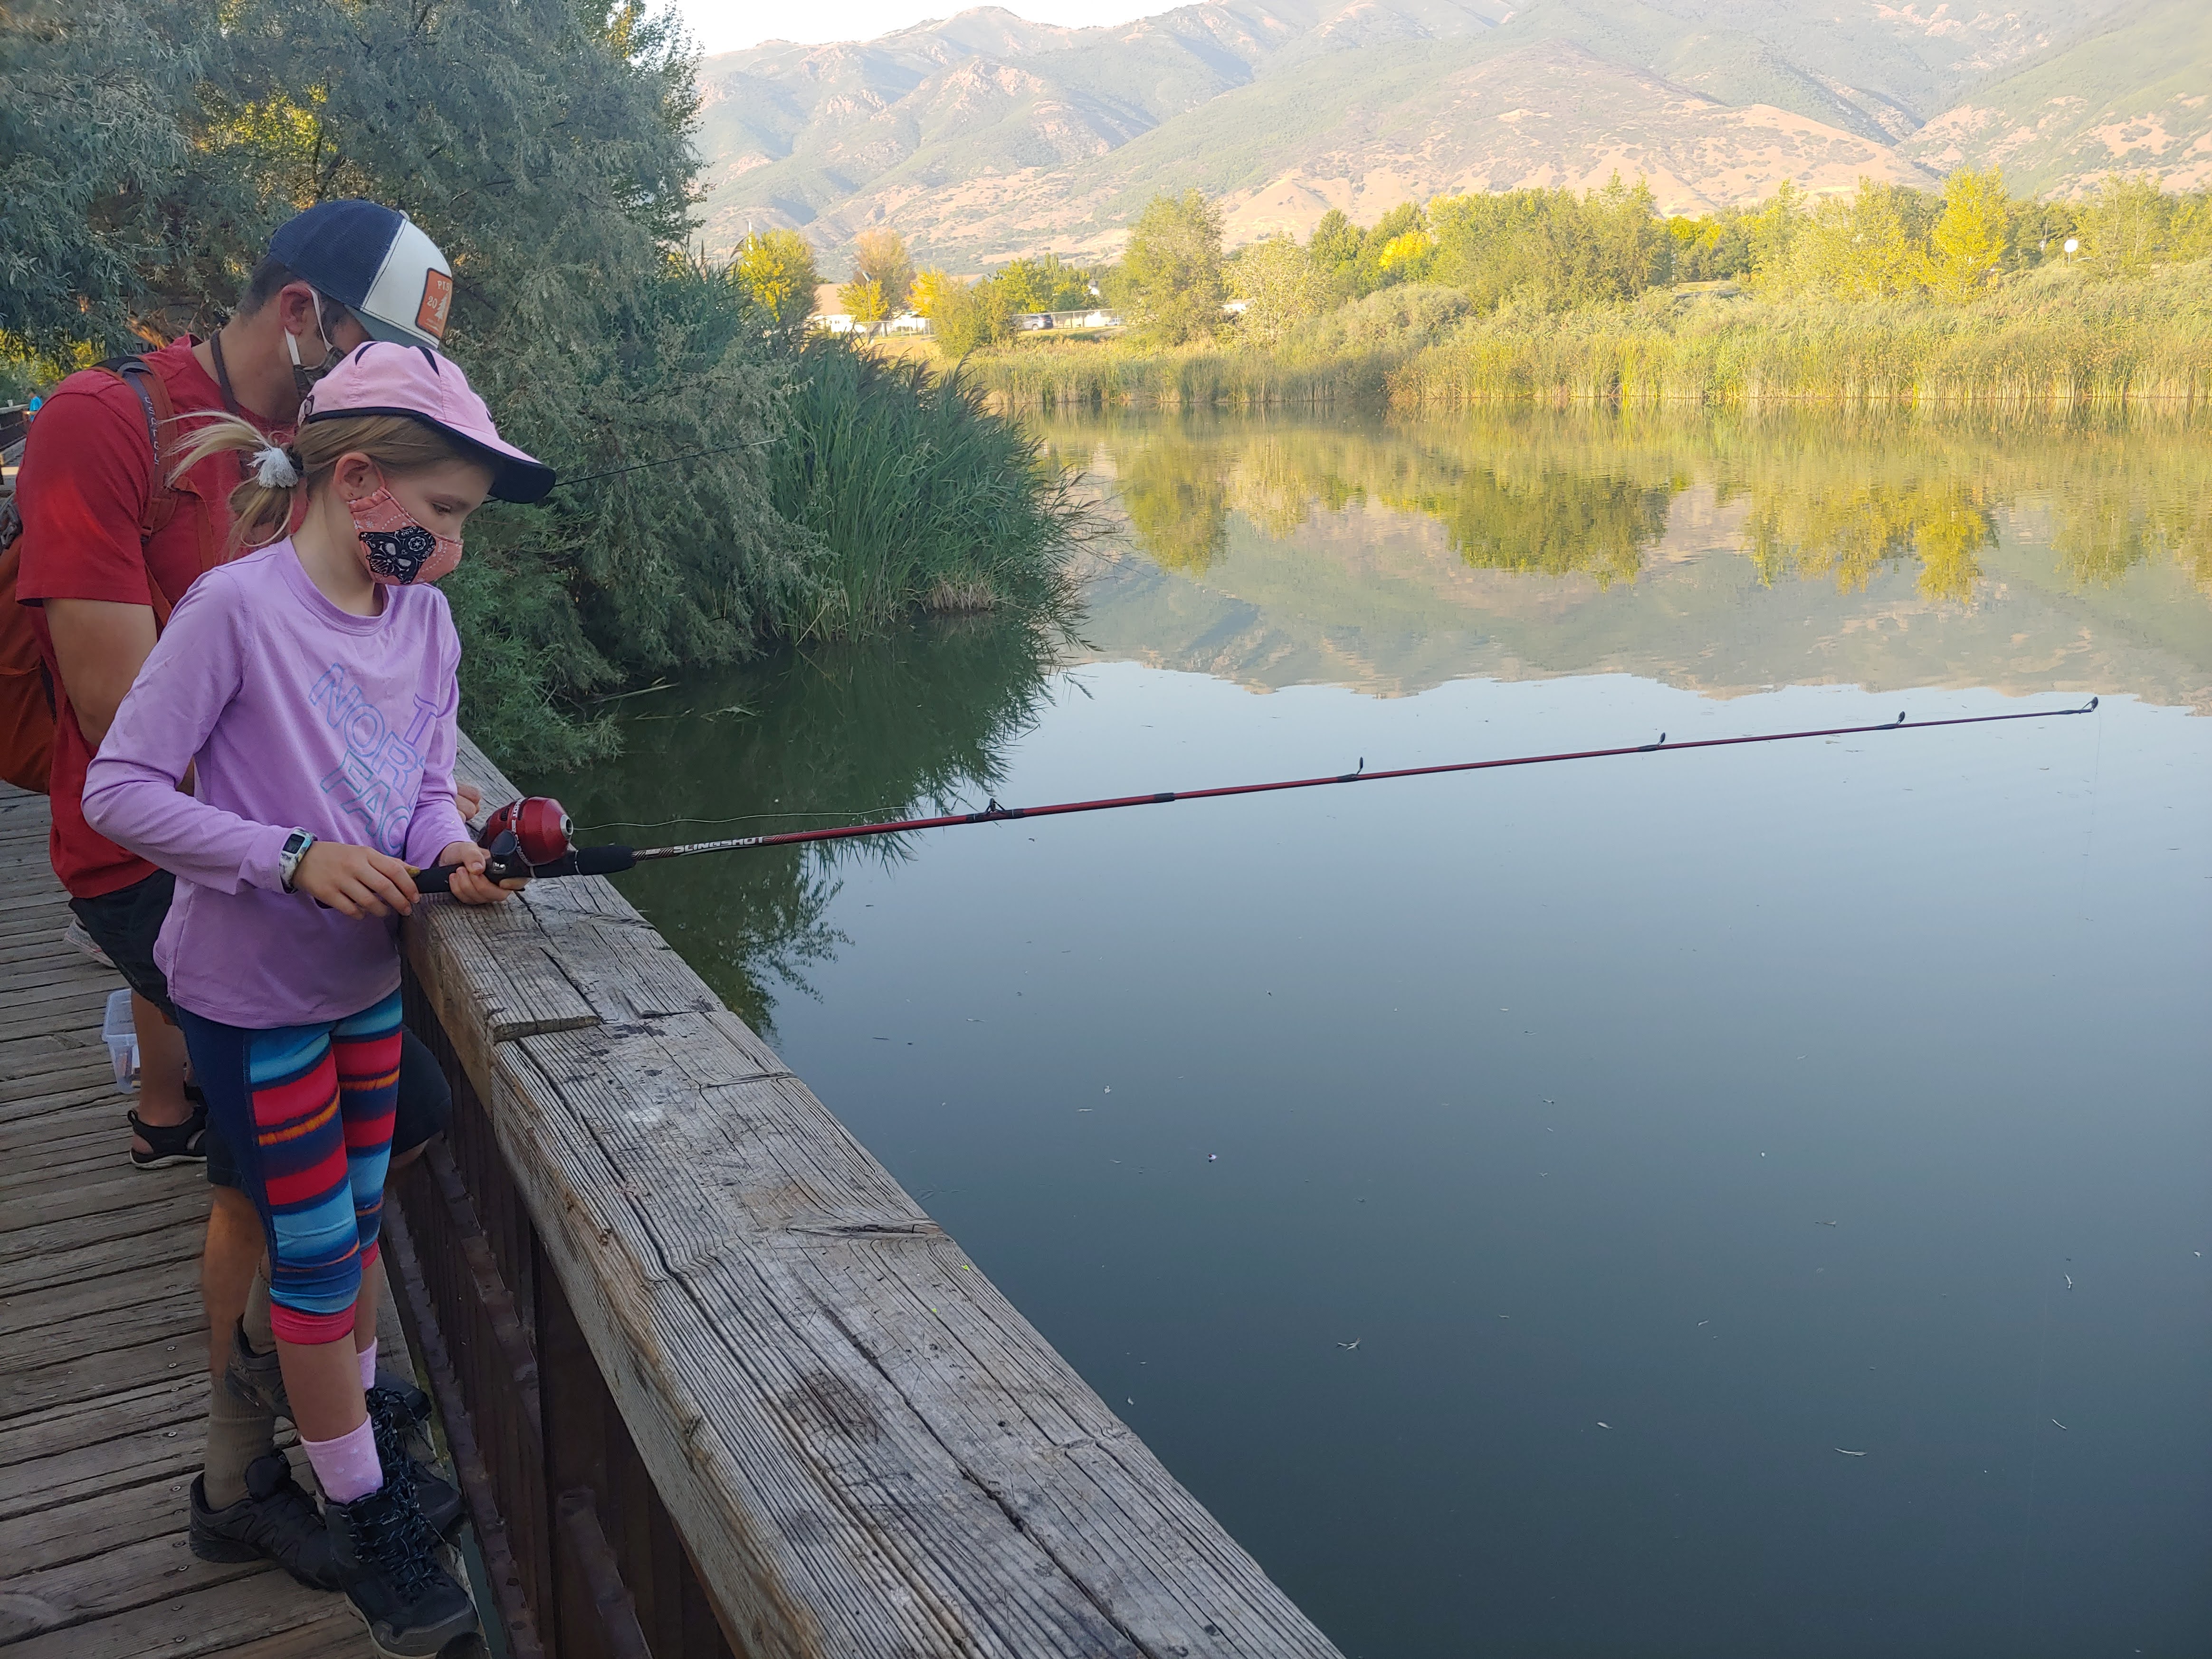 Youth fishing off of boardwalk at Kaysville Ponds